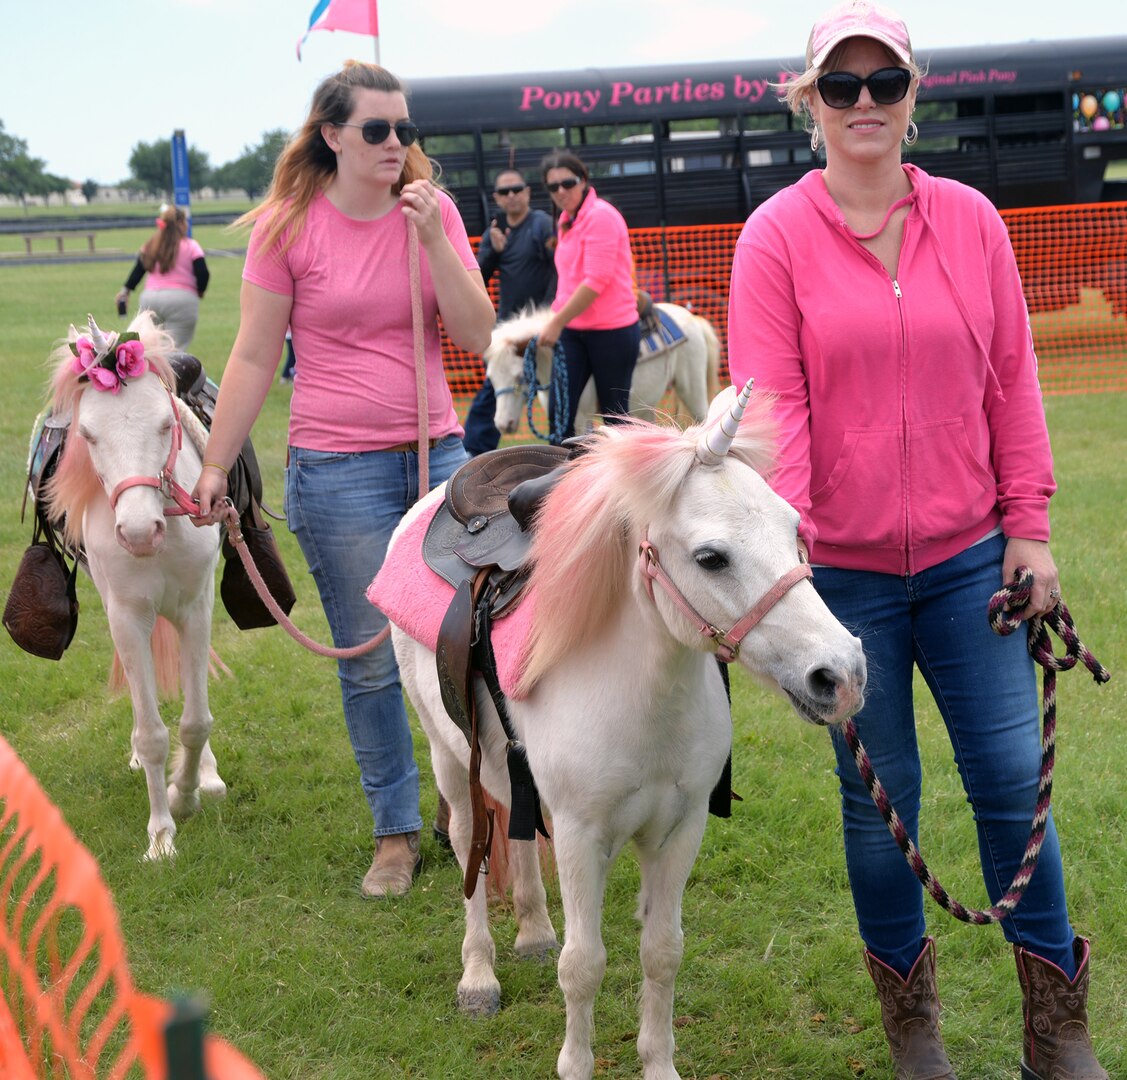 Unicorns are real?!? Well, maybe not, but the kids at the pony rides sure enjoyed riding them during the annual Cowboys and Heroes event held at MacArthur Parade Field at Joint Base San Antonio-Fort Sam Houston April 14.